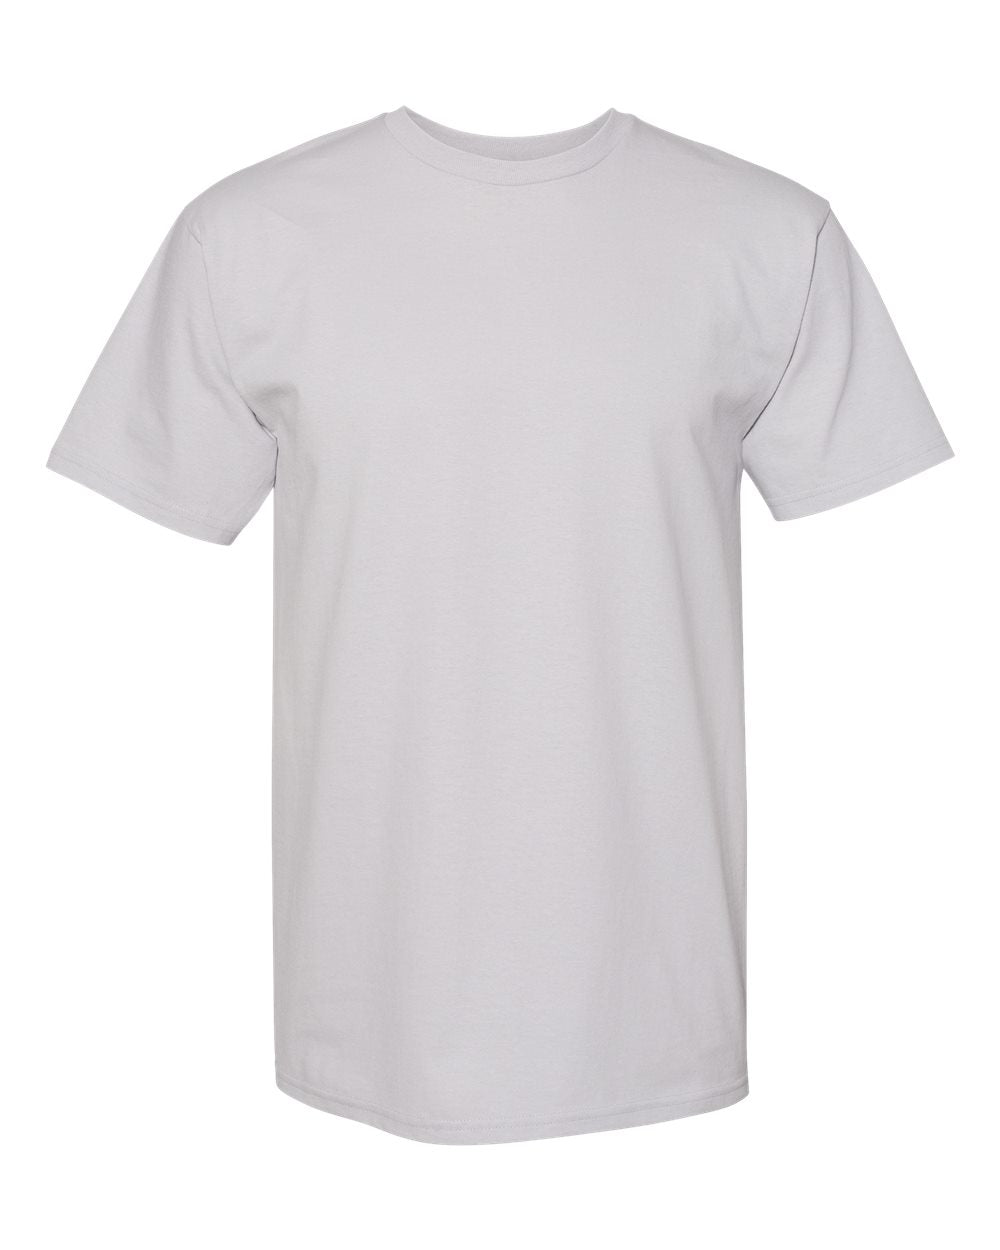 American Apparel Midweight Cotton Unisex Tee 1701 #color_Silver